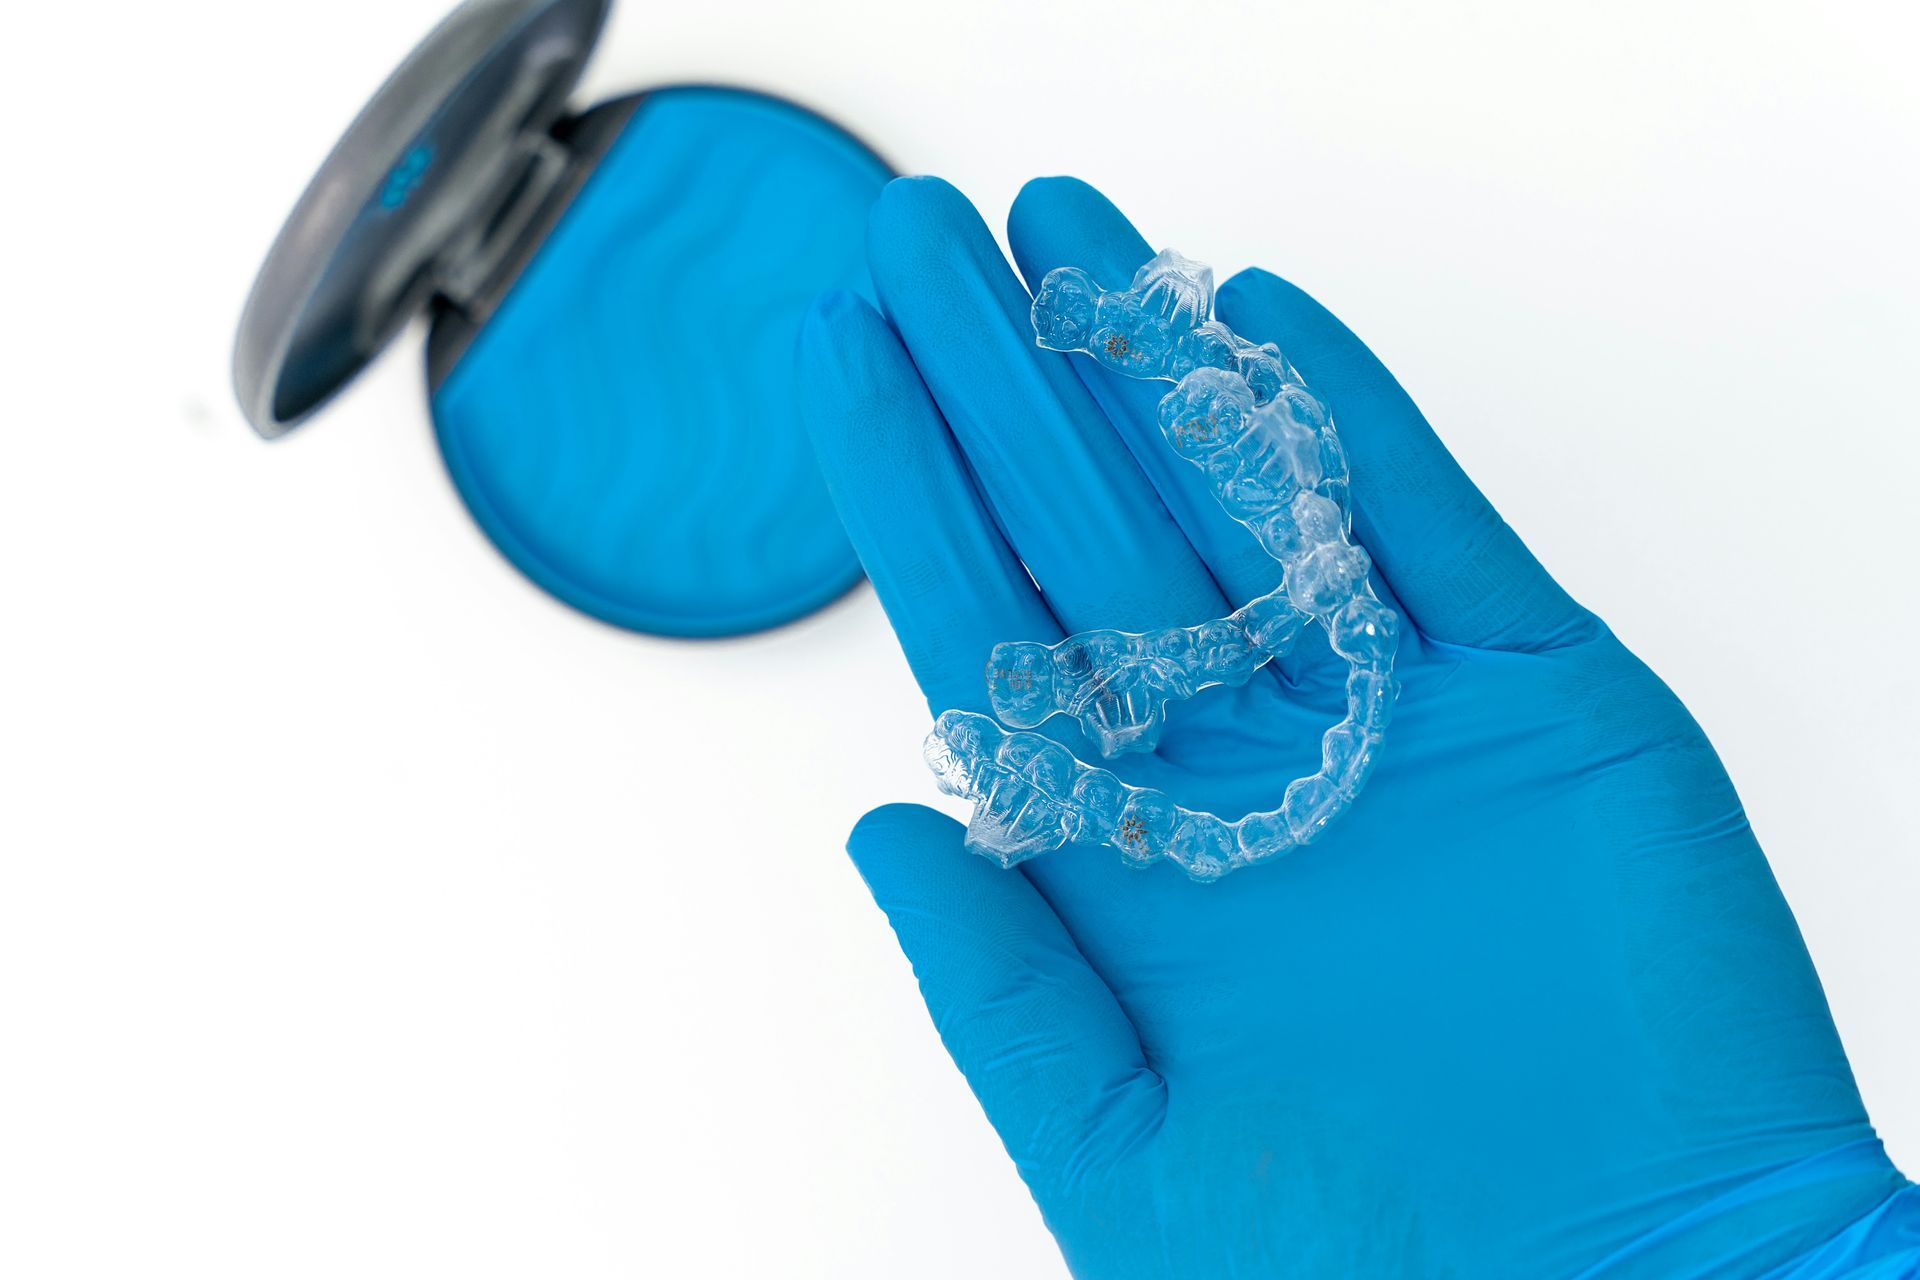 A person wearing blue gloves is holding an Invisalign clear brace in their hand.